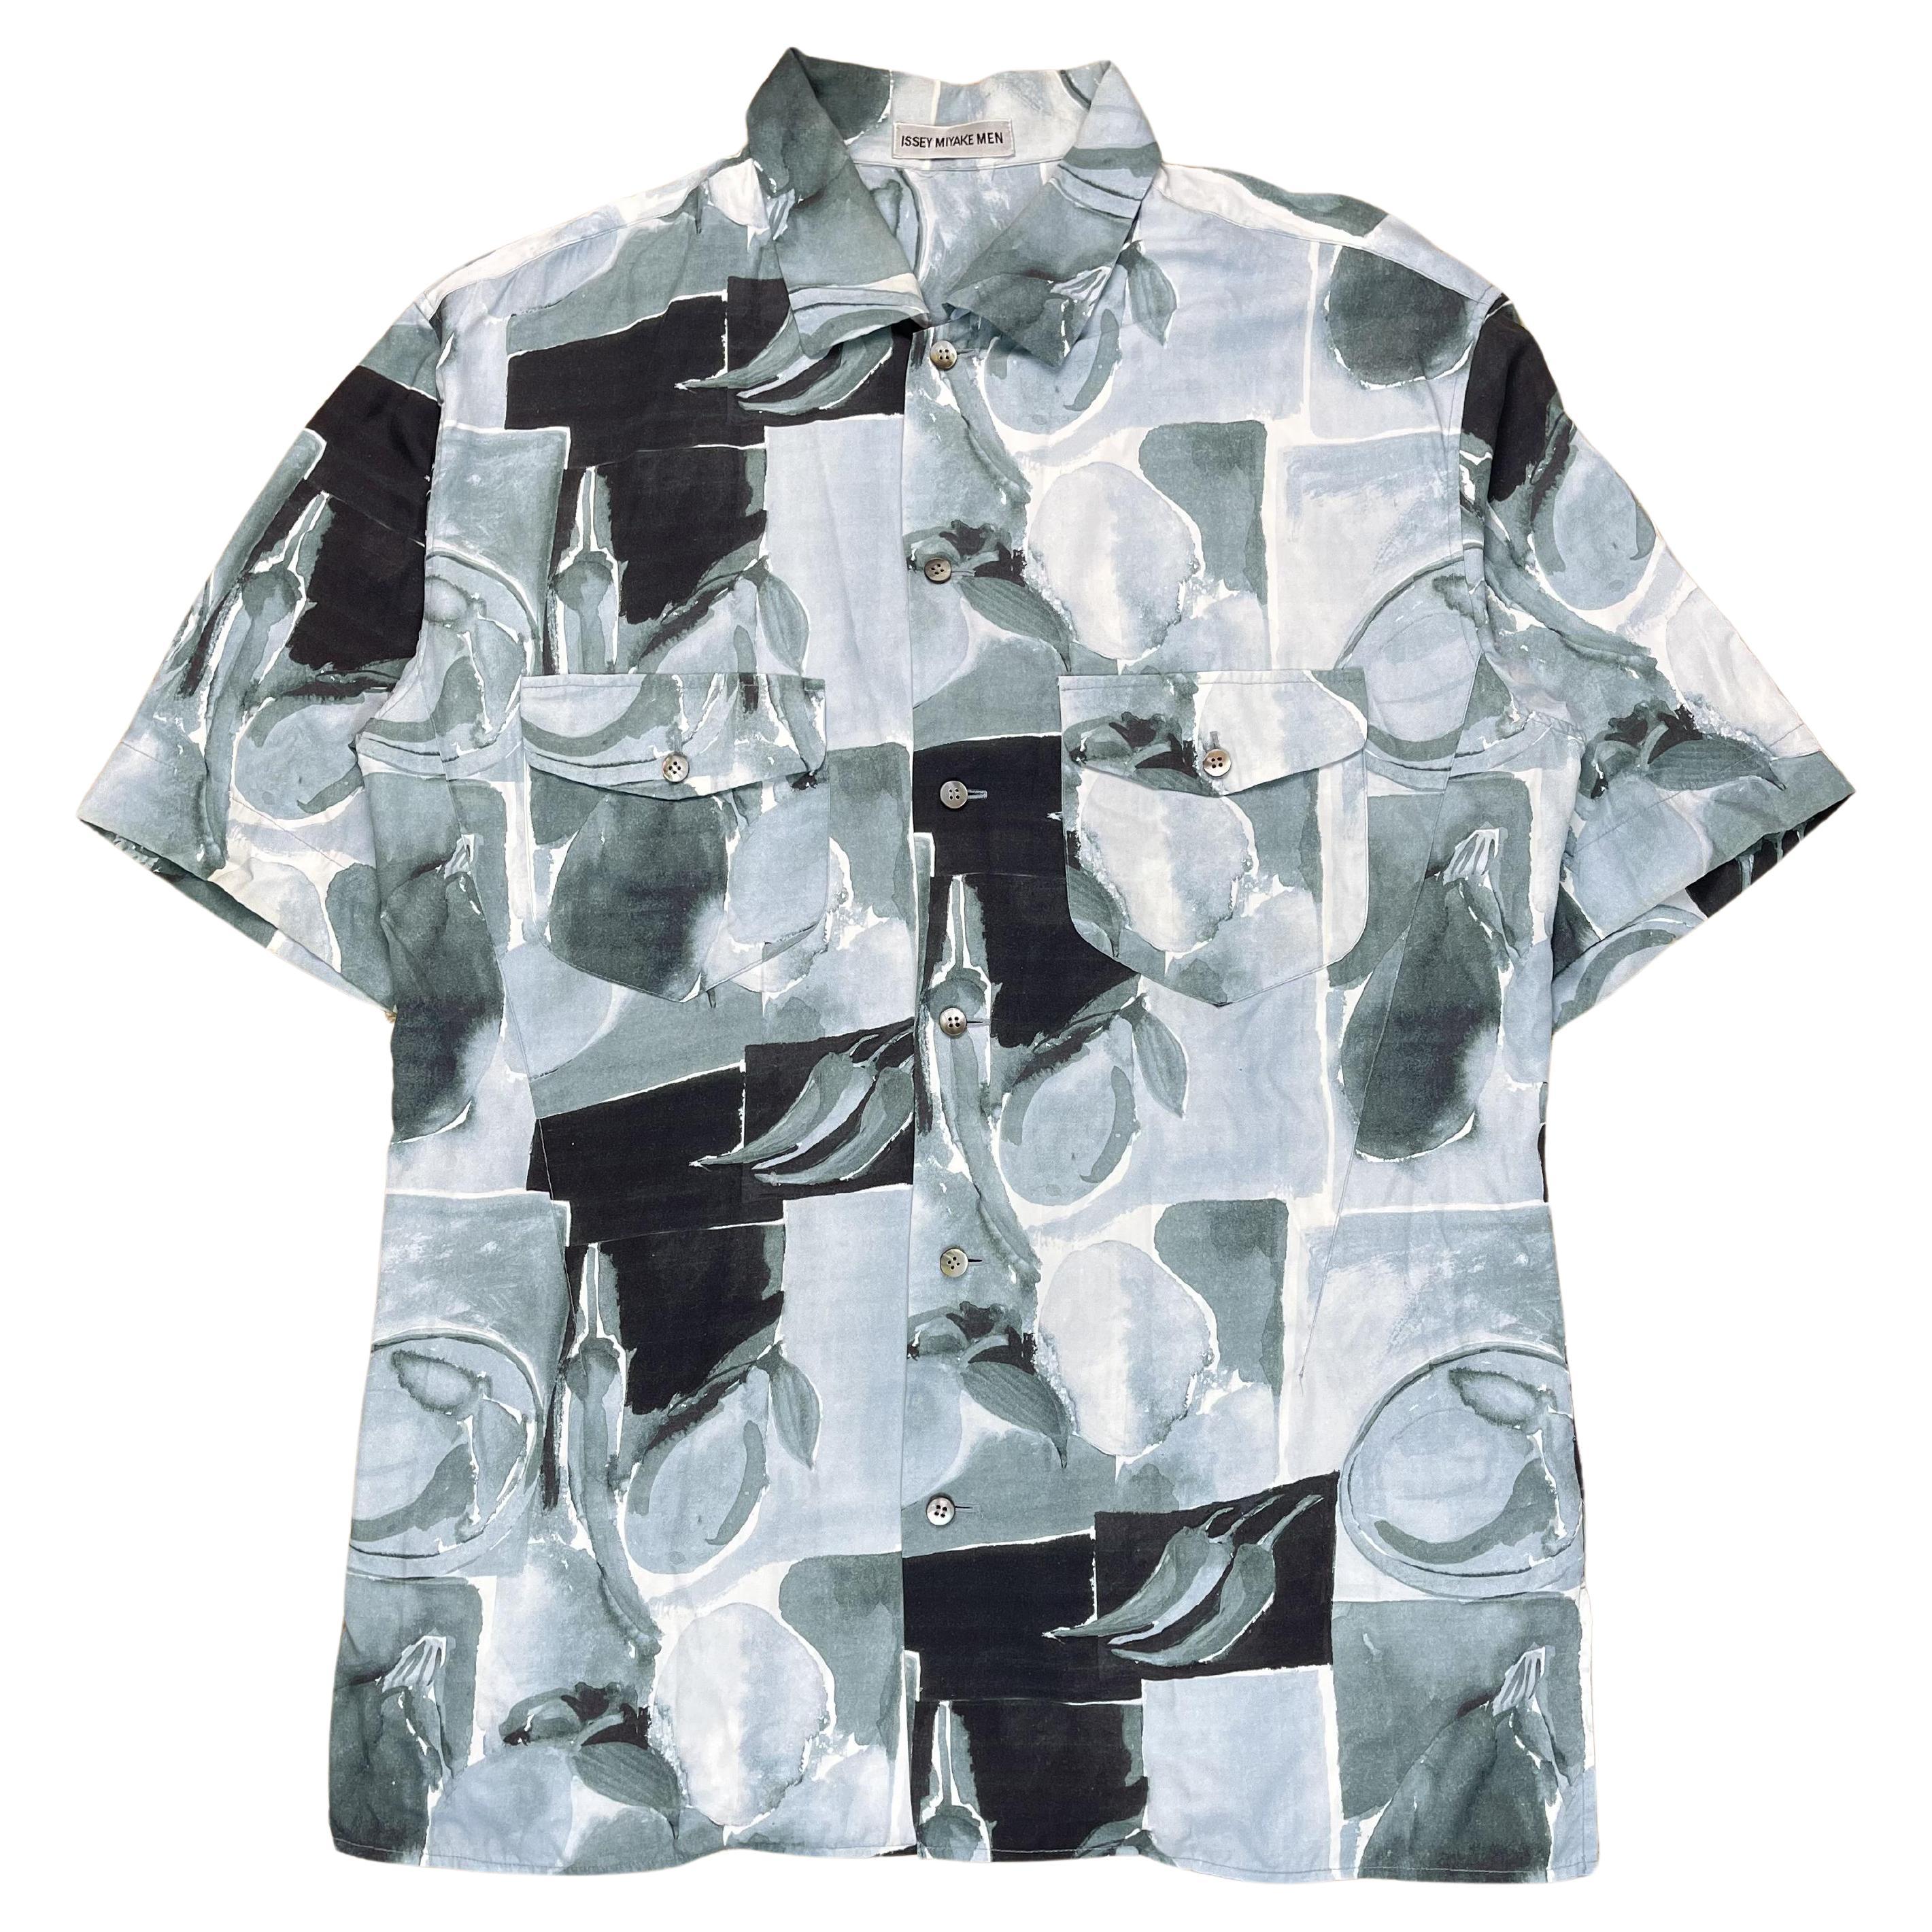 Issey Miyake S/S1997 Lily Water Flower Shirt For Sale